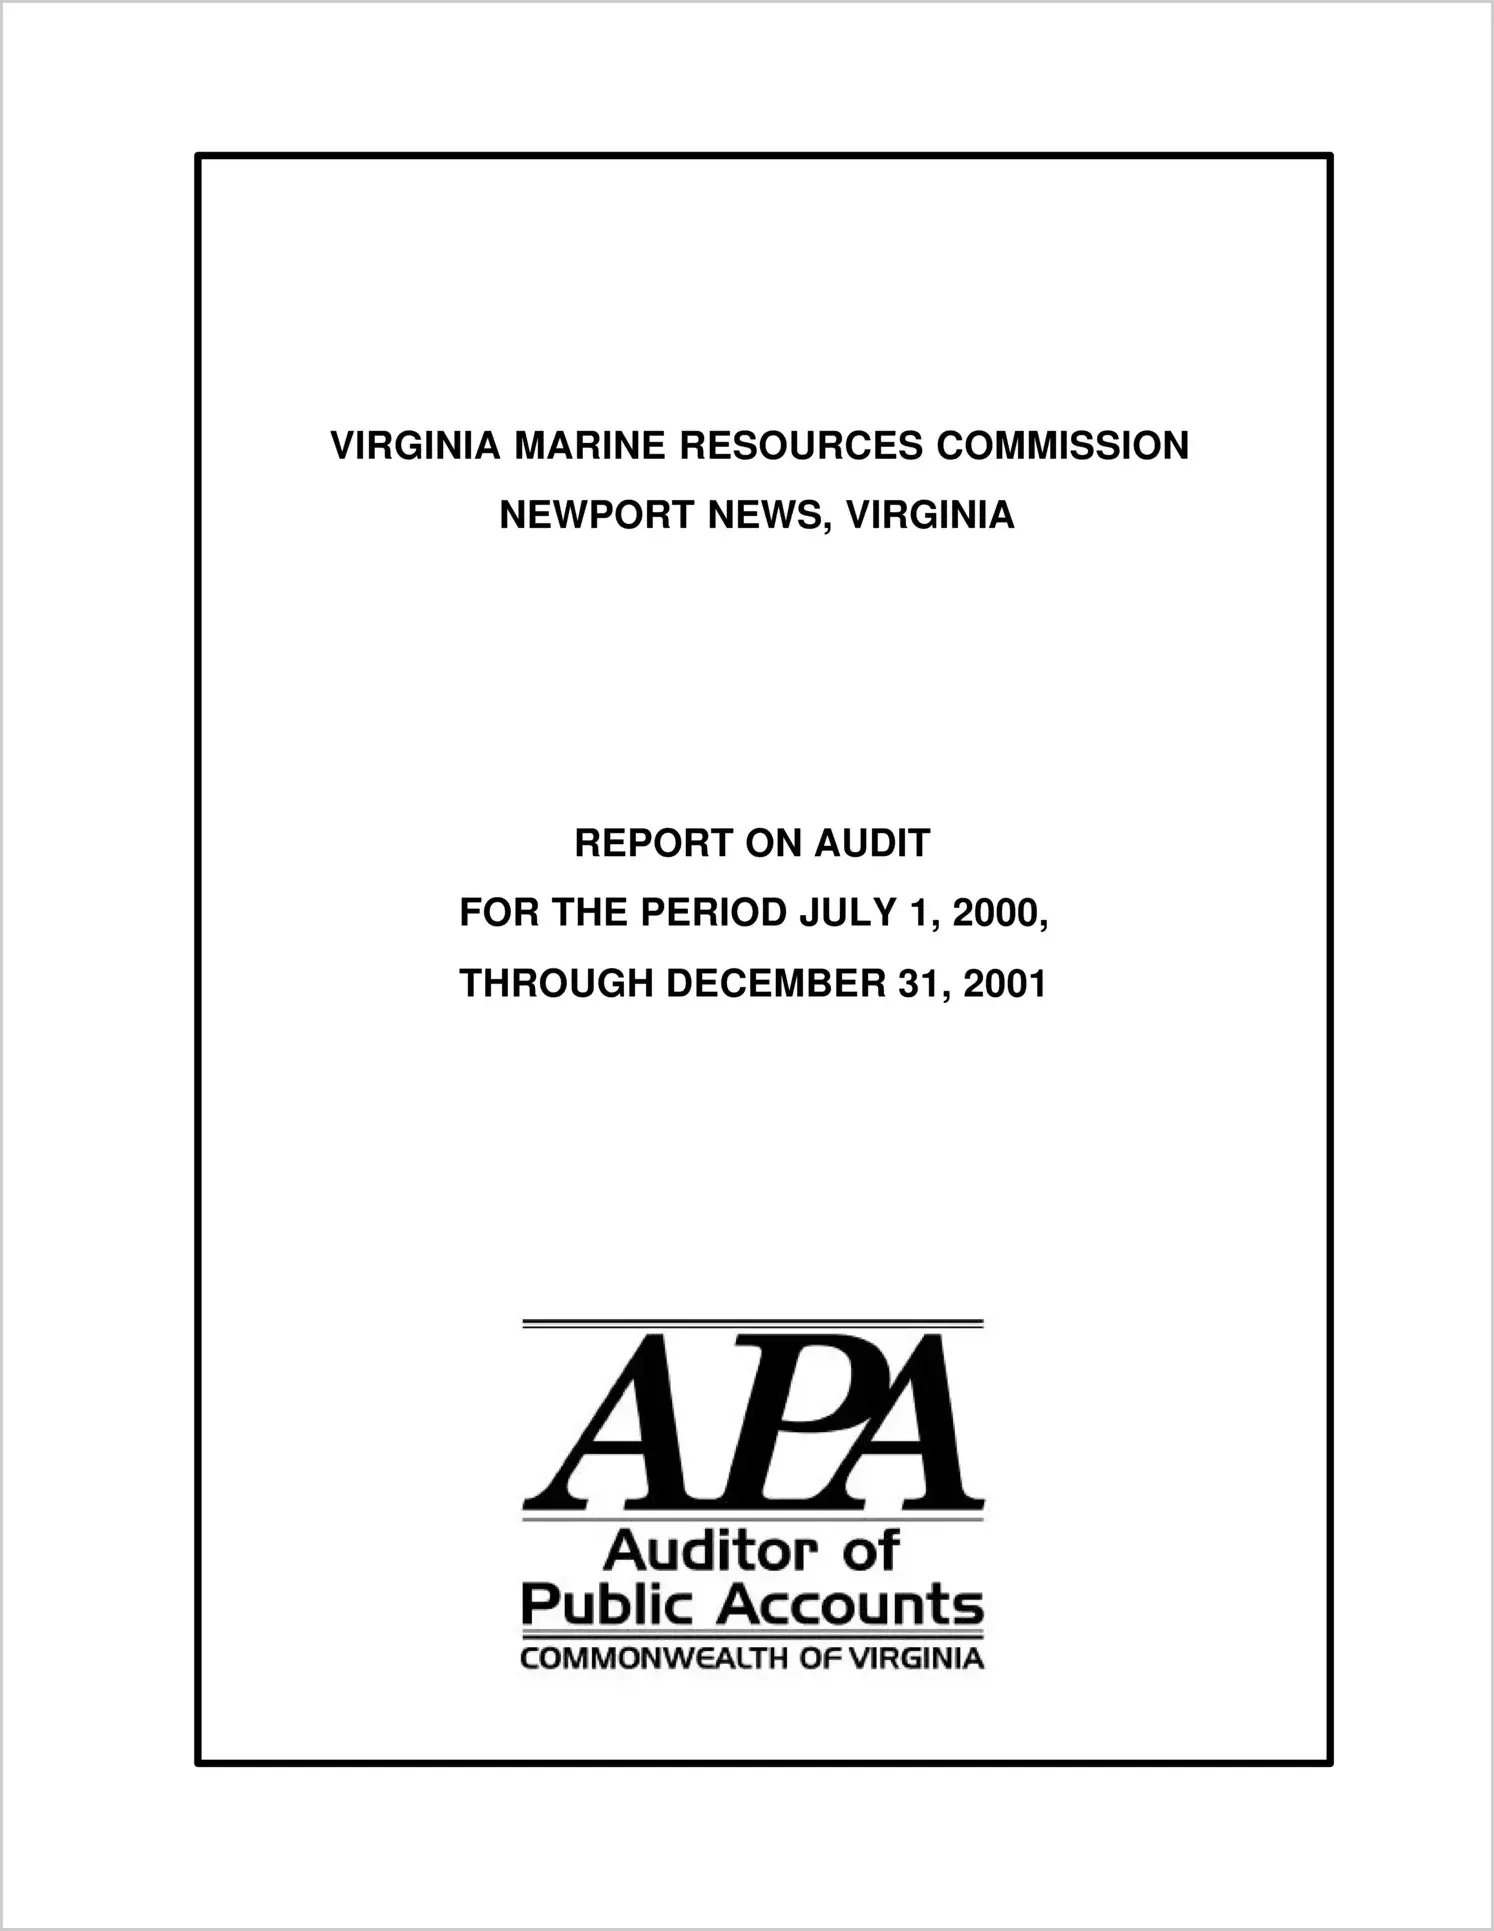 Virginia Marine Resources Commission for the year ended June 30, 2001